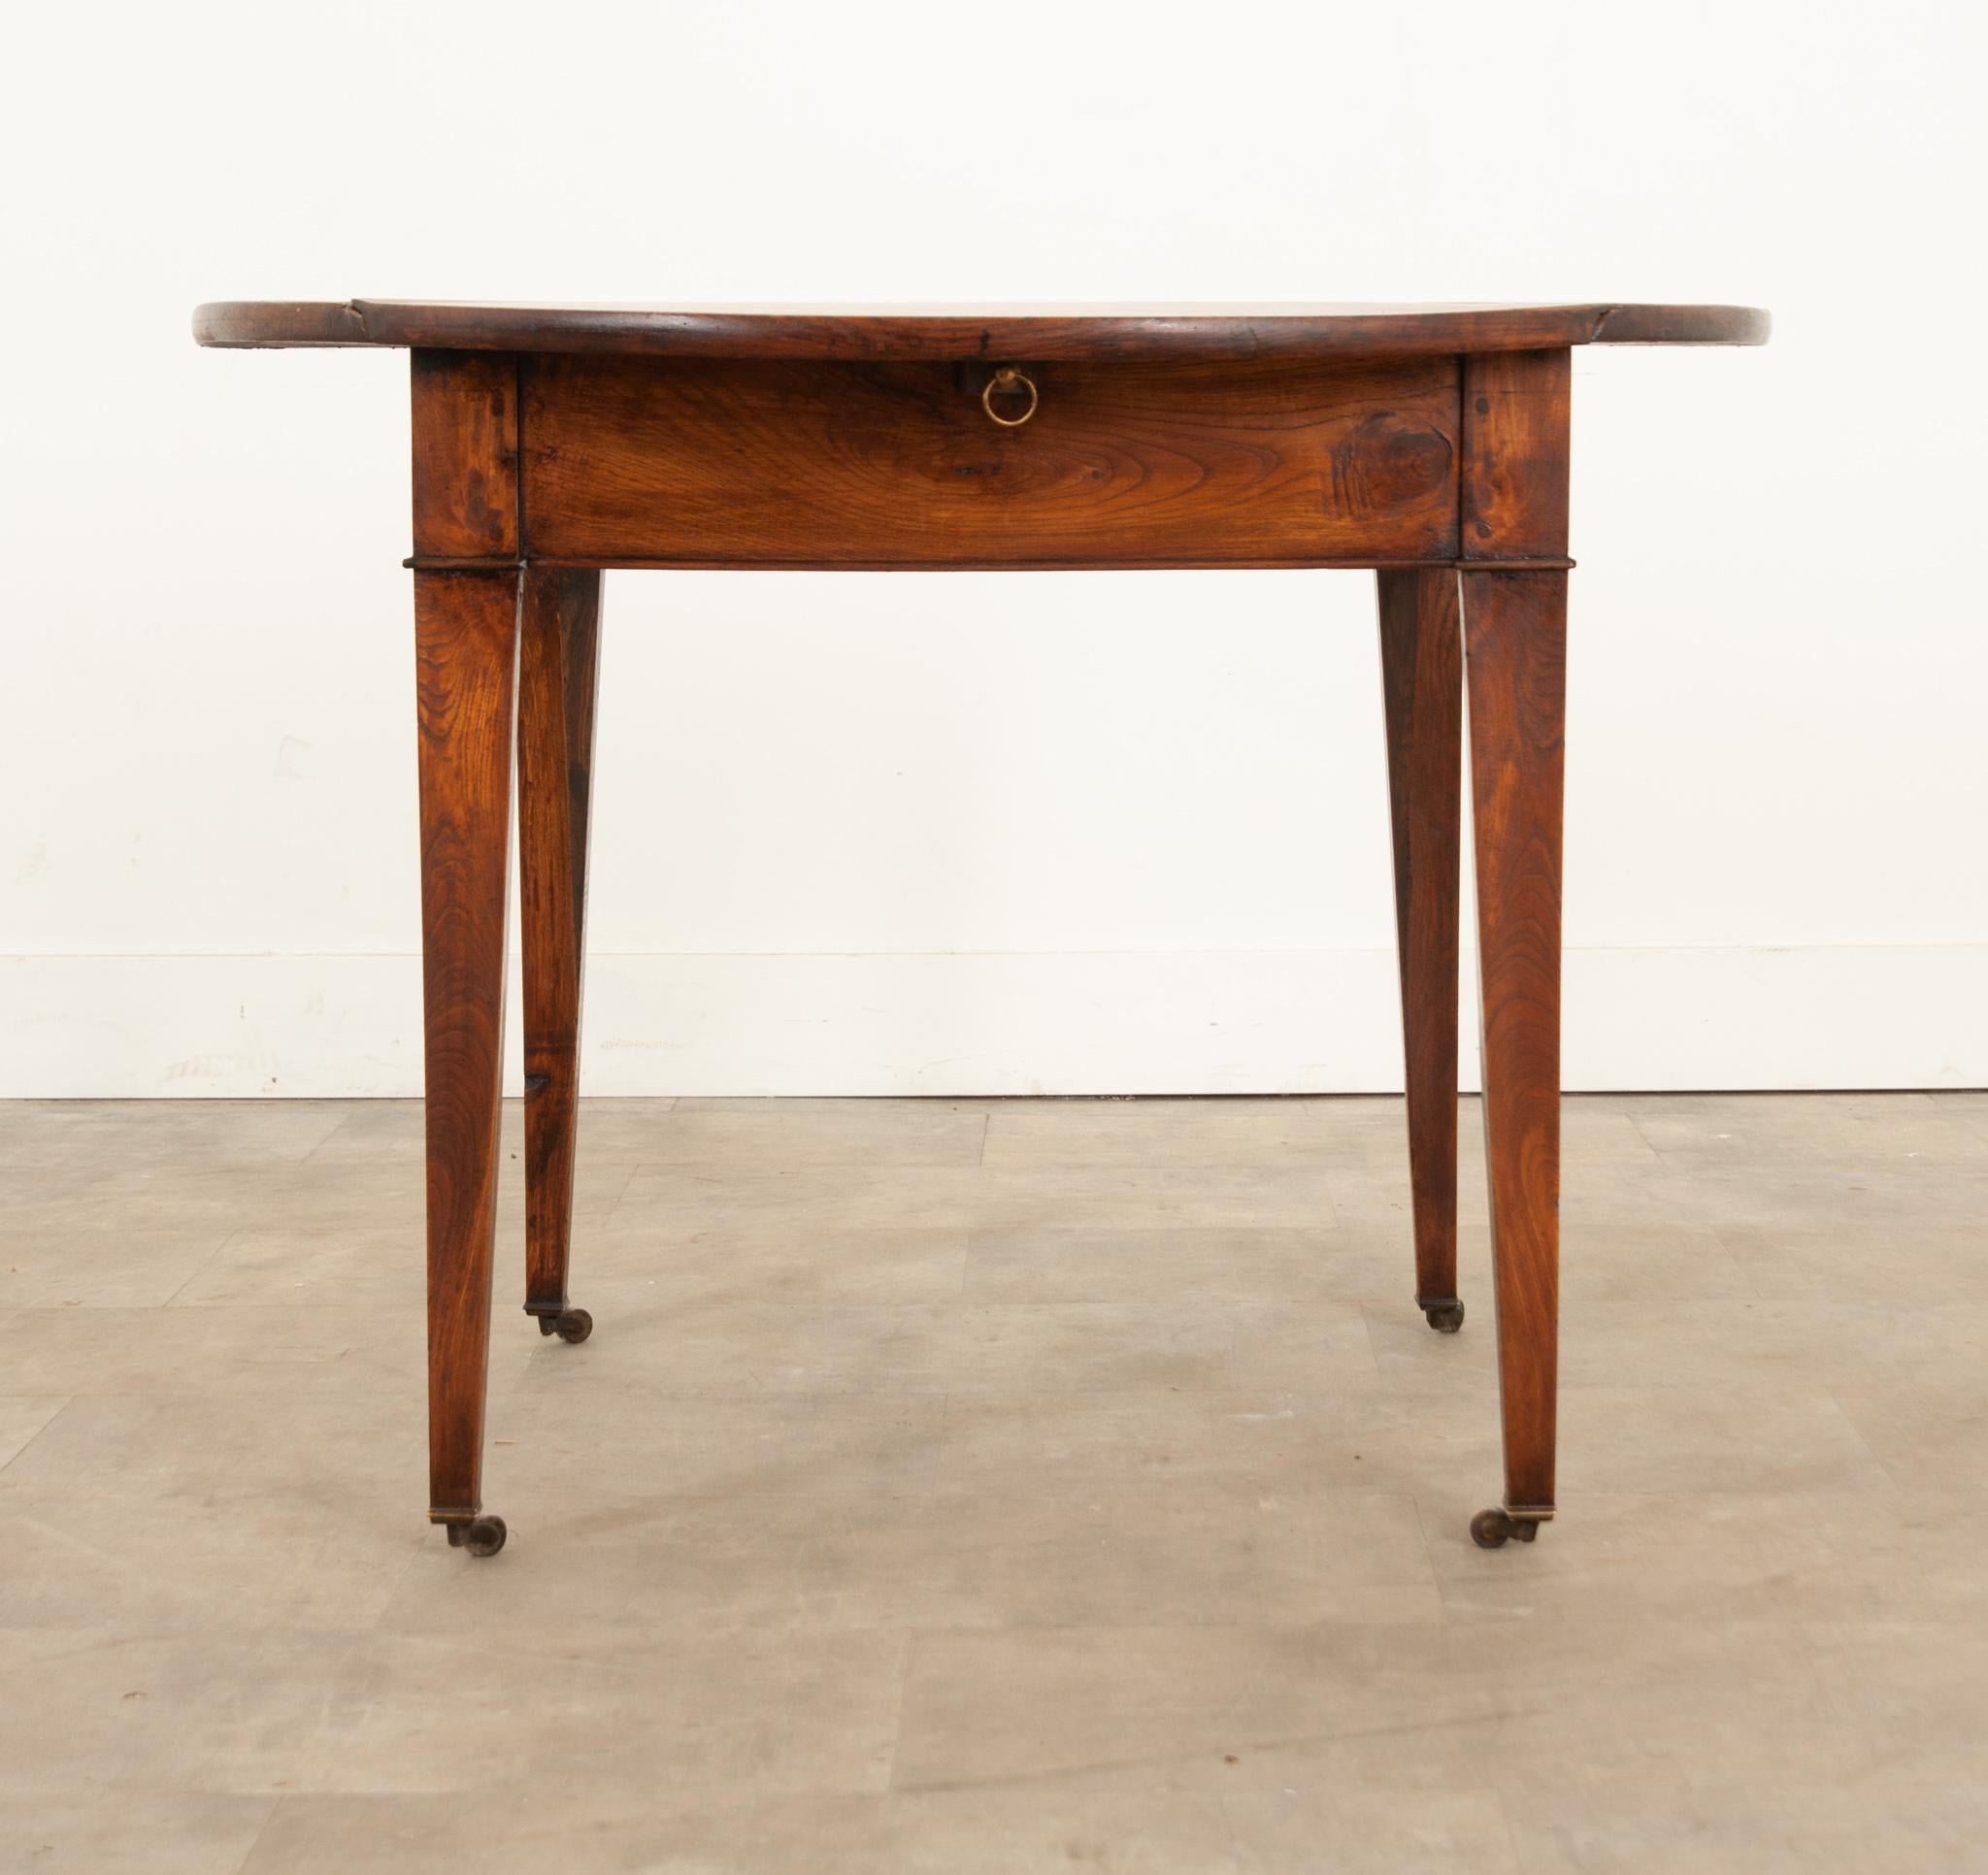 French Provincial French 19th Century Oak Drop-leaf Table